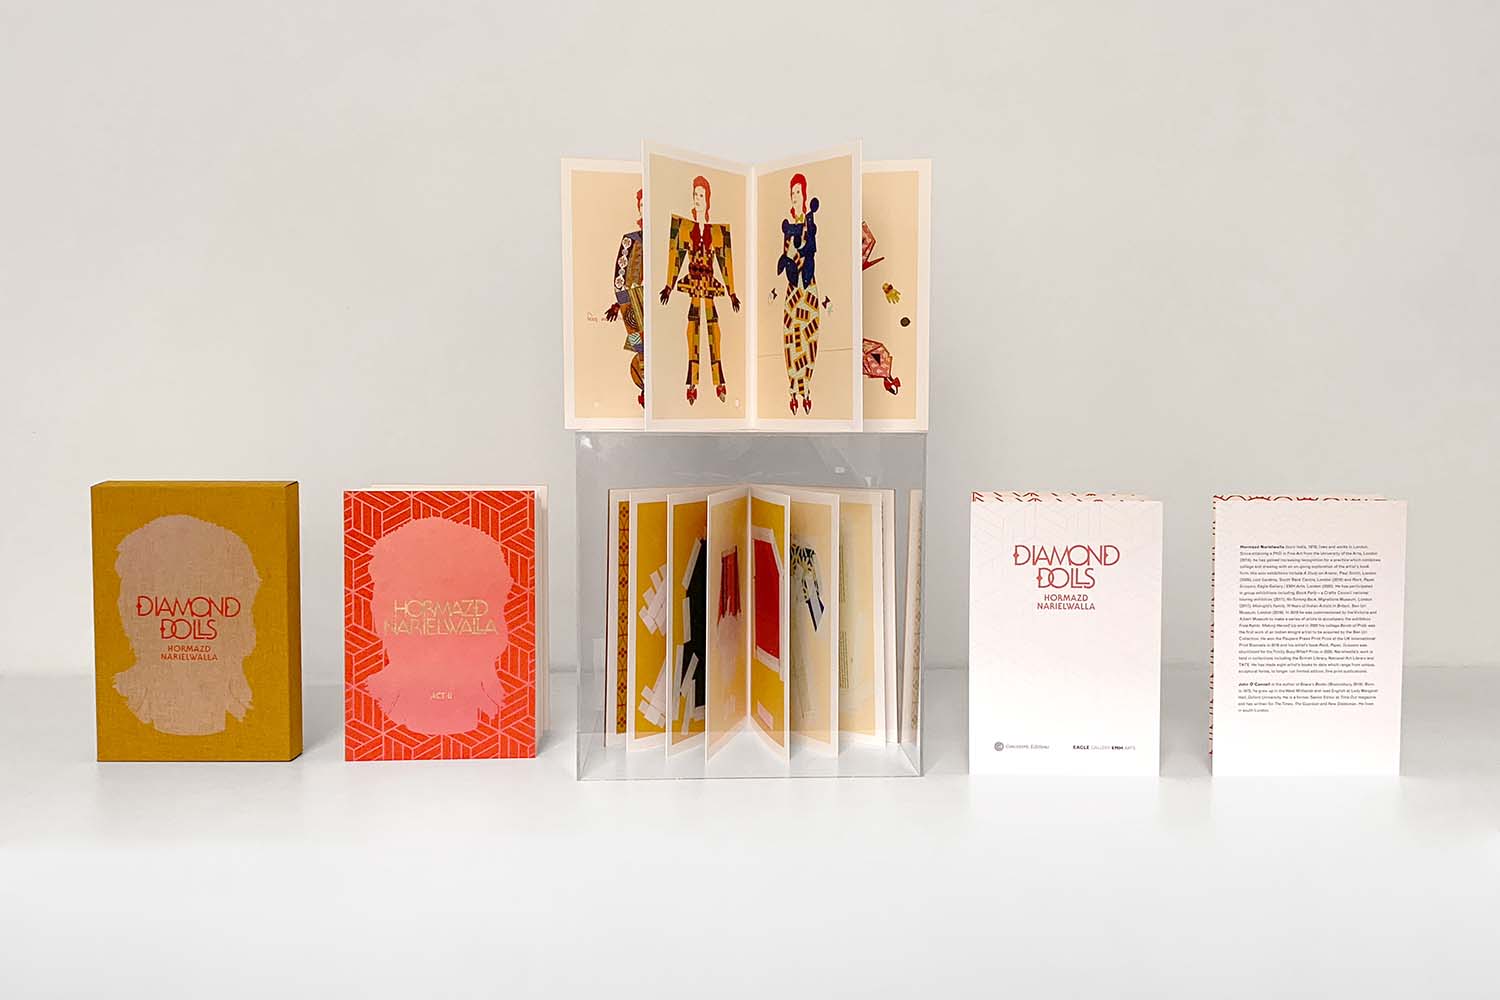 Hormazd Narielwalla, Diamond Dolls David Bowie Limited Edition Art Book Giveaway